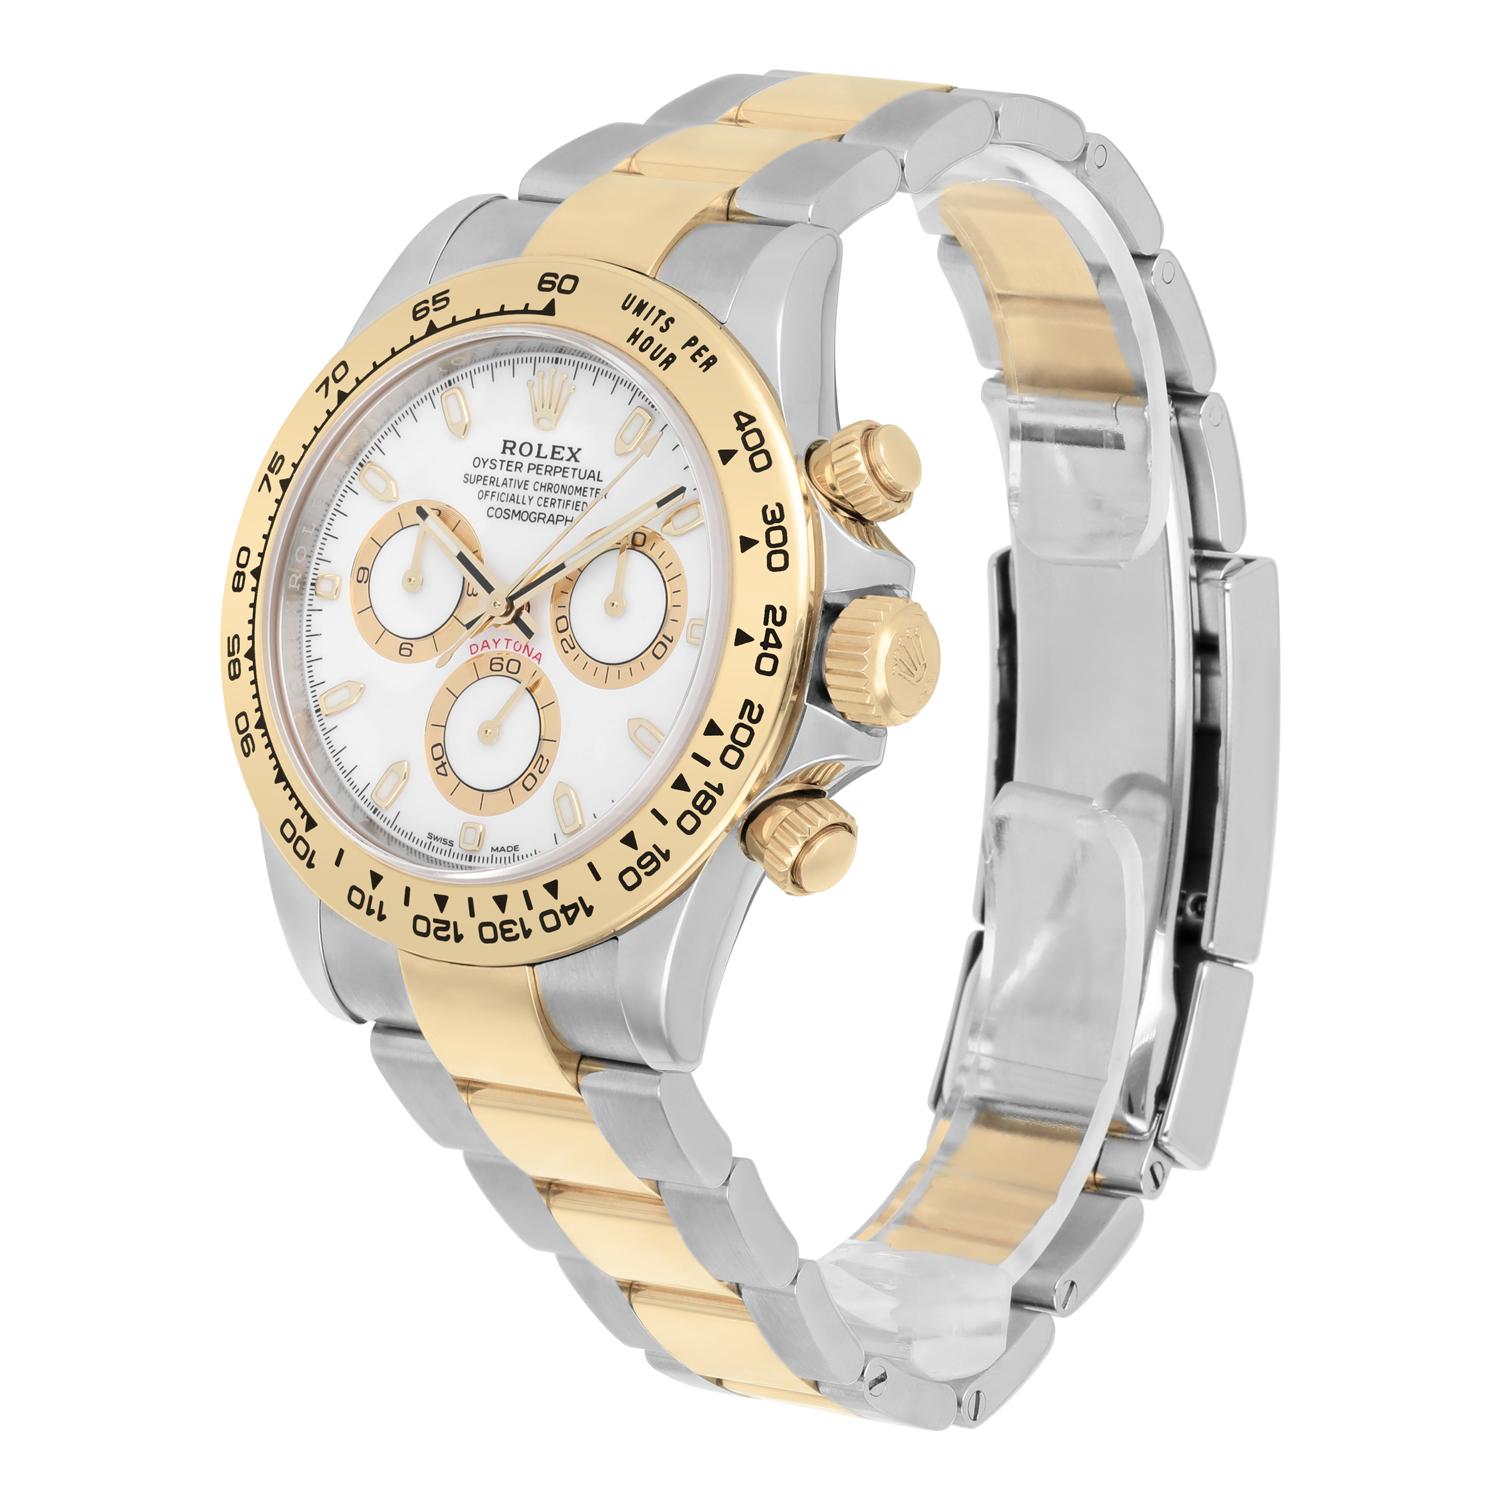 Men's Rolex Cosmograph Daytona Stainless Steel/Yellow Gold White Dial Watch 116503 For Sale